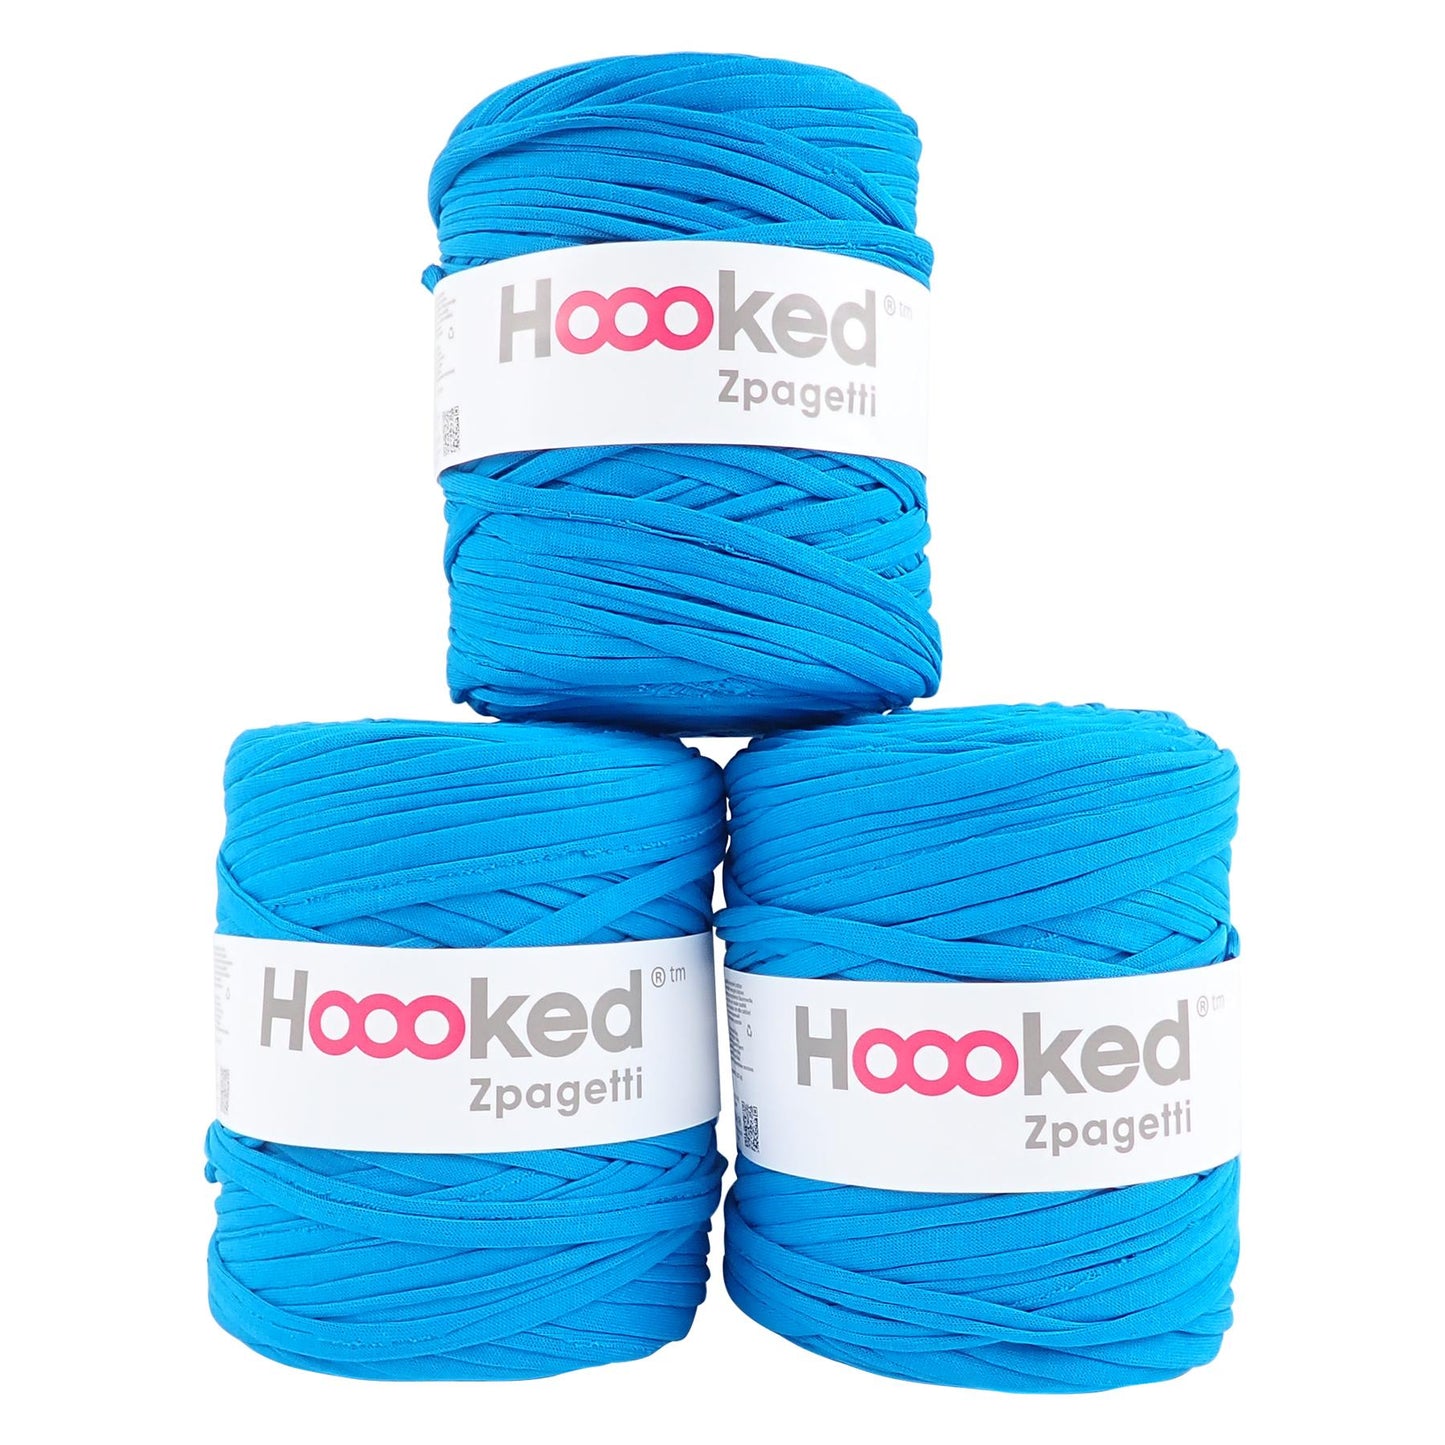 Hoooked Zpagetti Sky Blue Cotton T-Shirt Yarn - 120M 700g (Pack of 3)